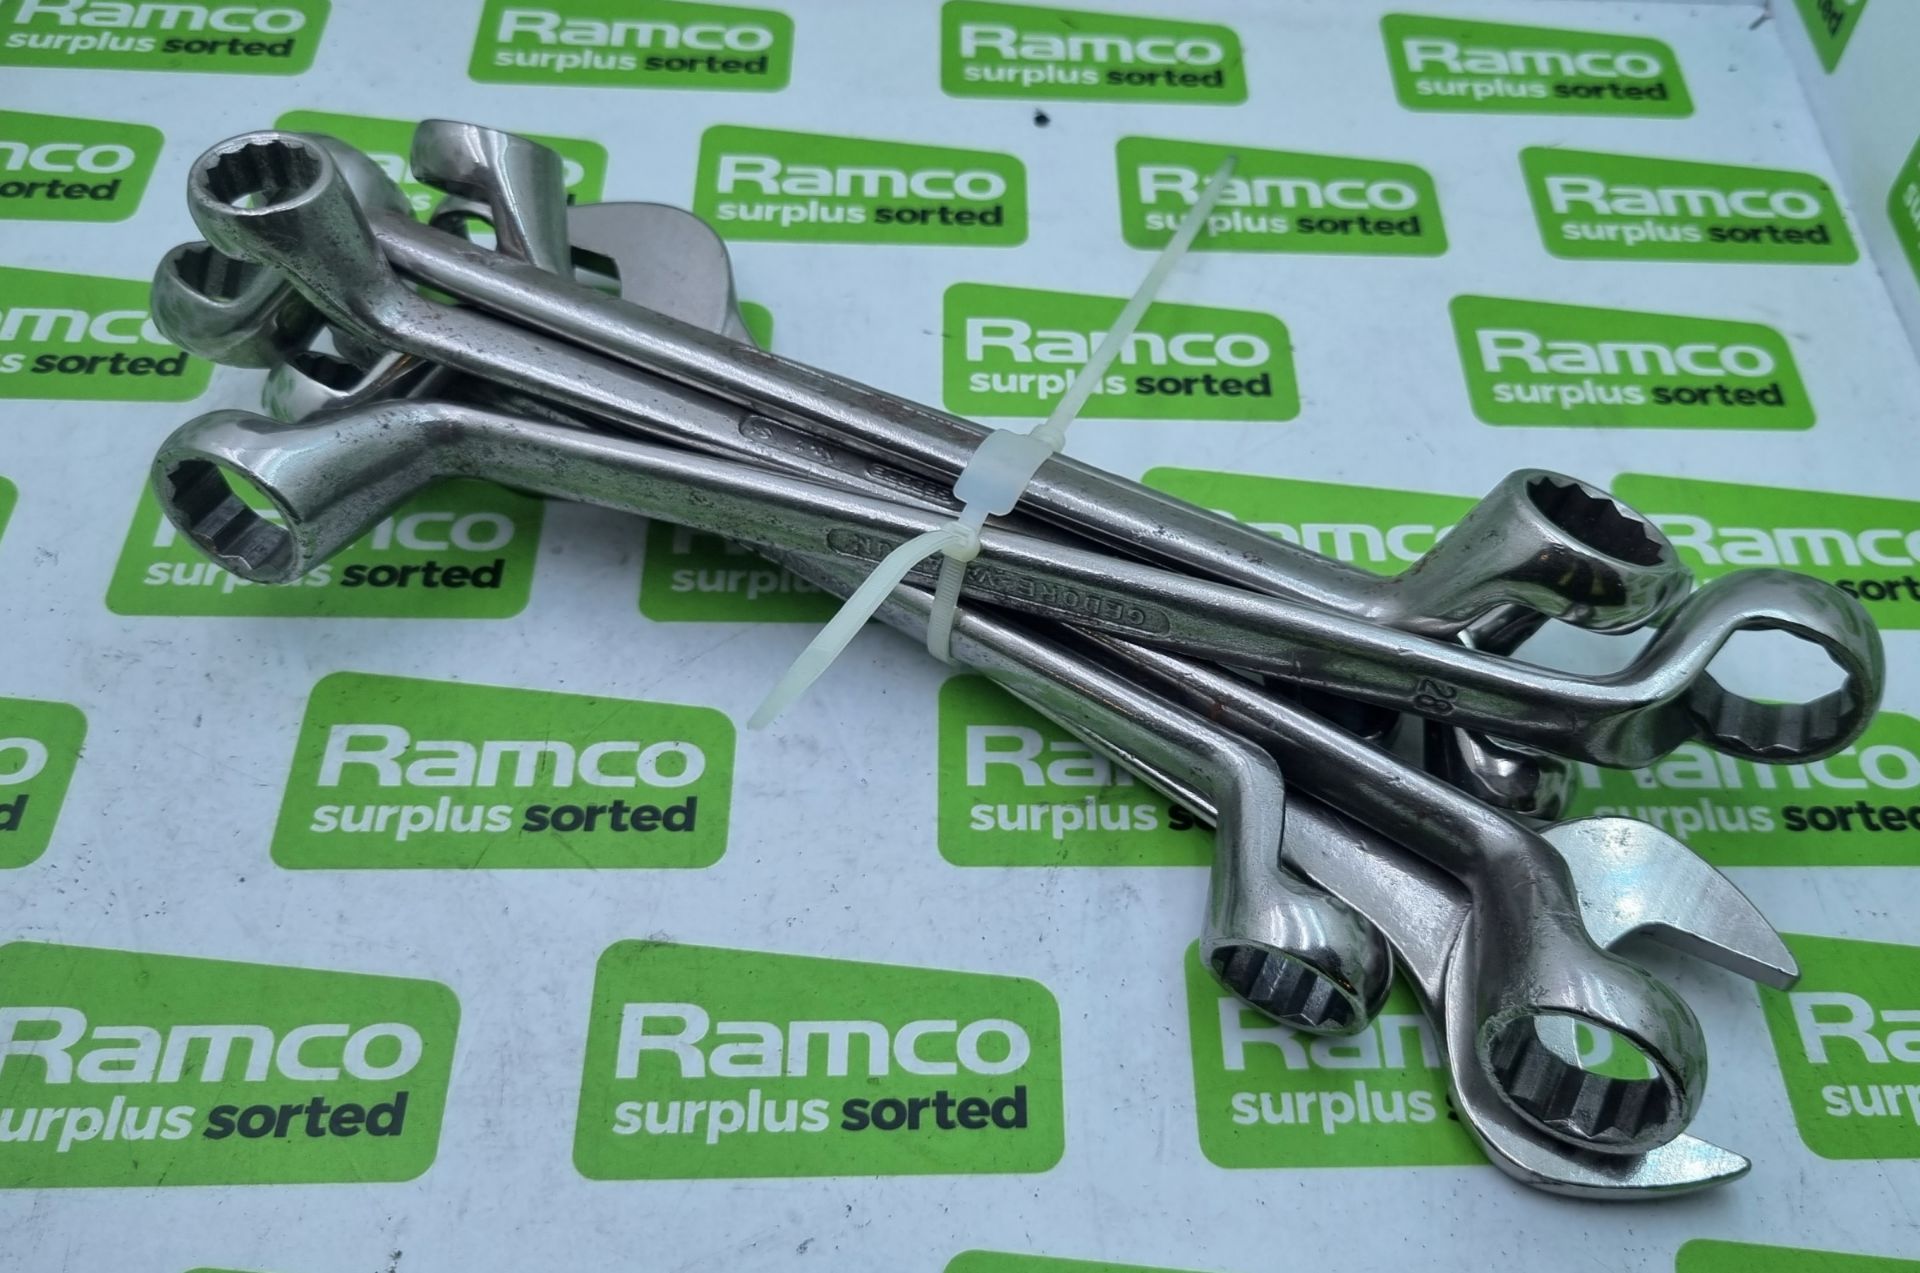 8x various sized spanners